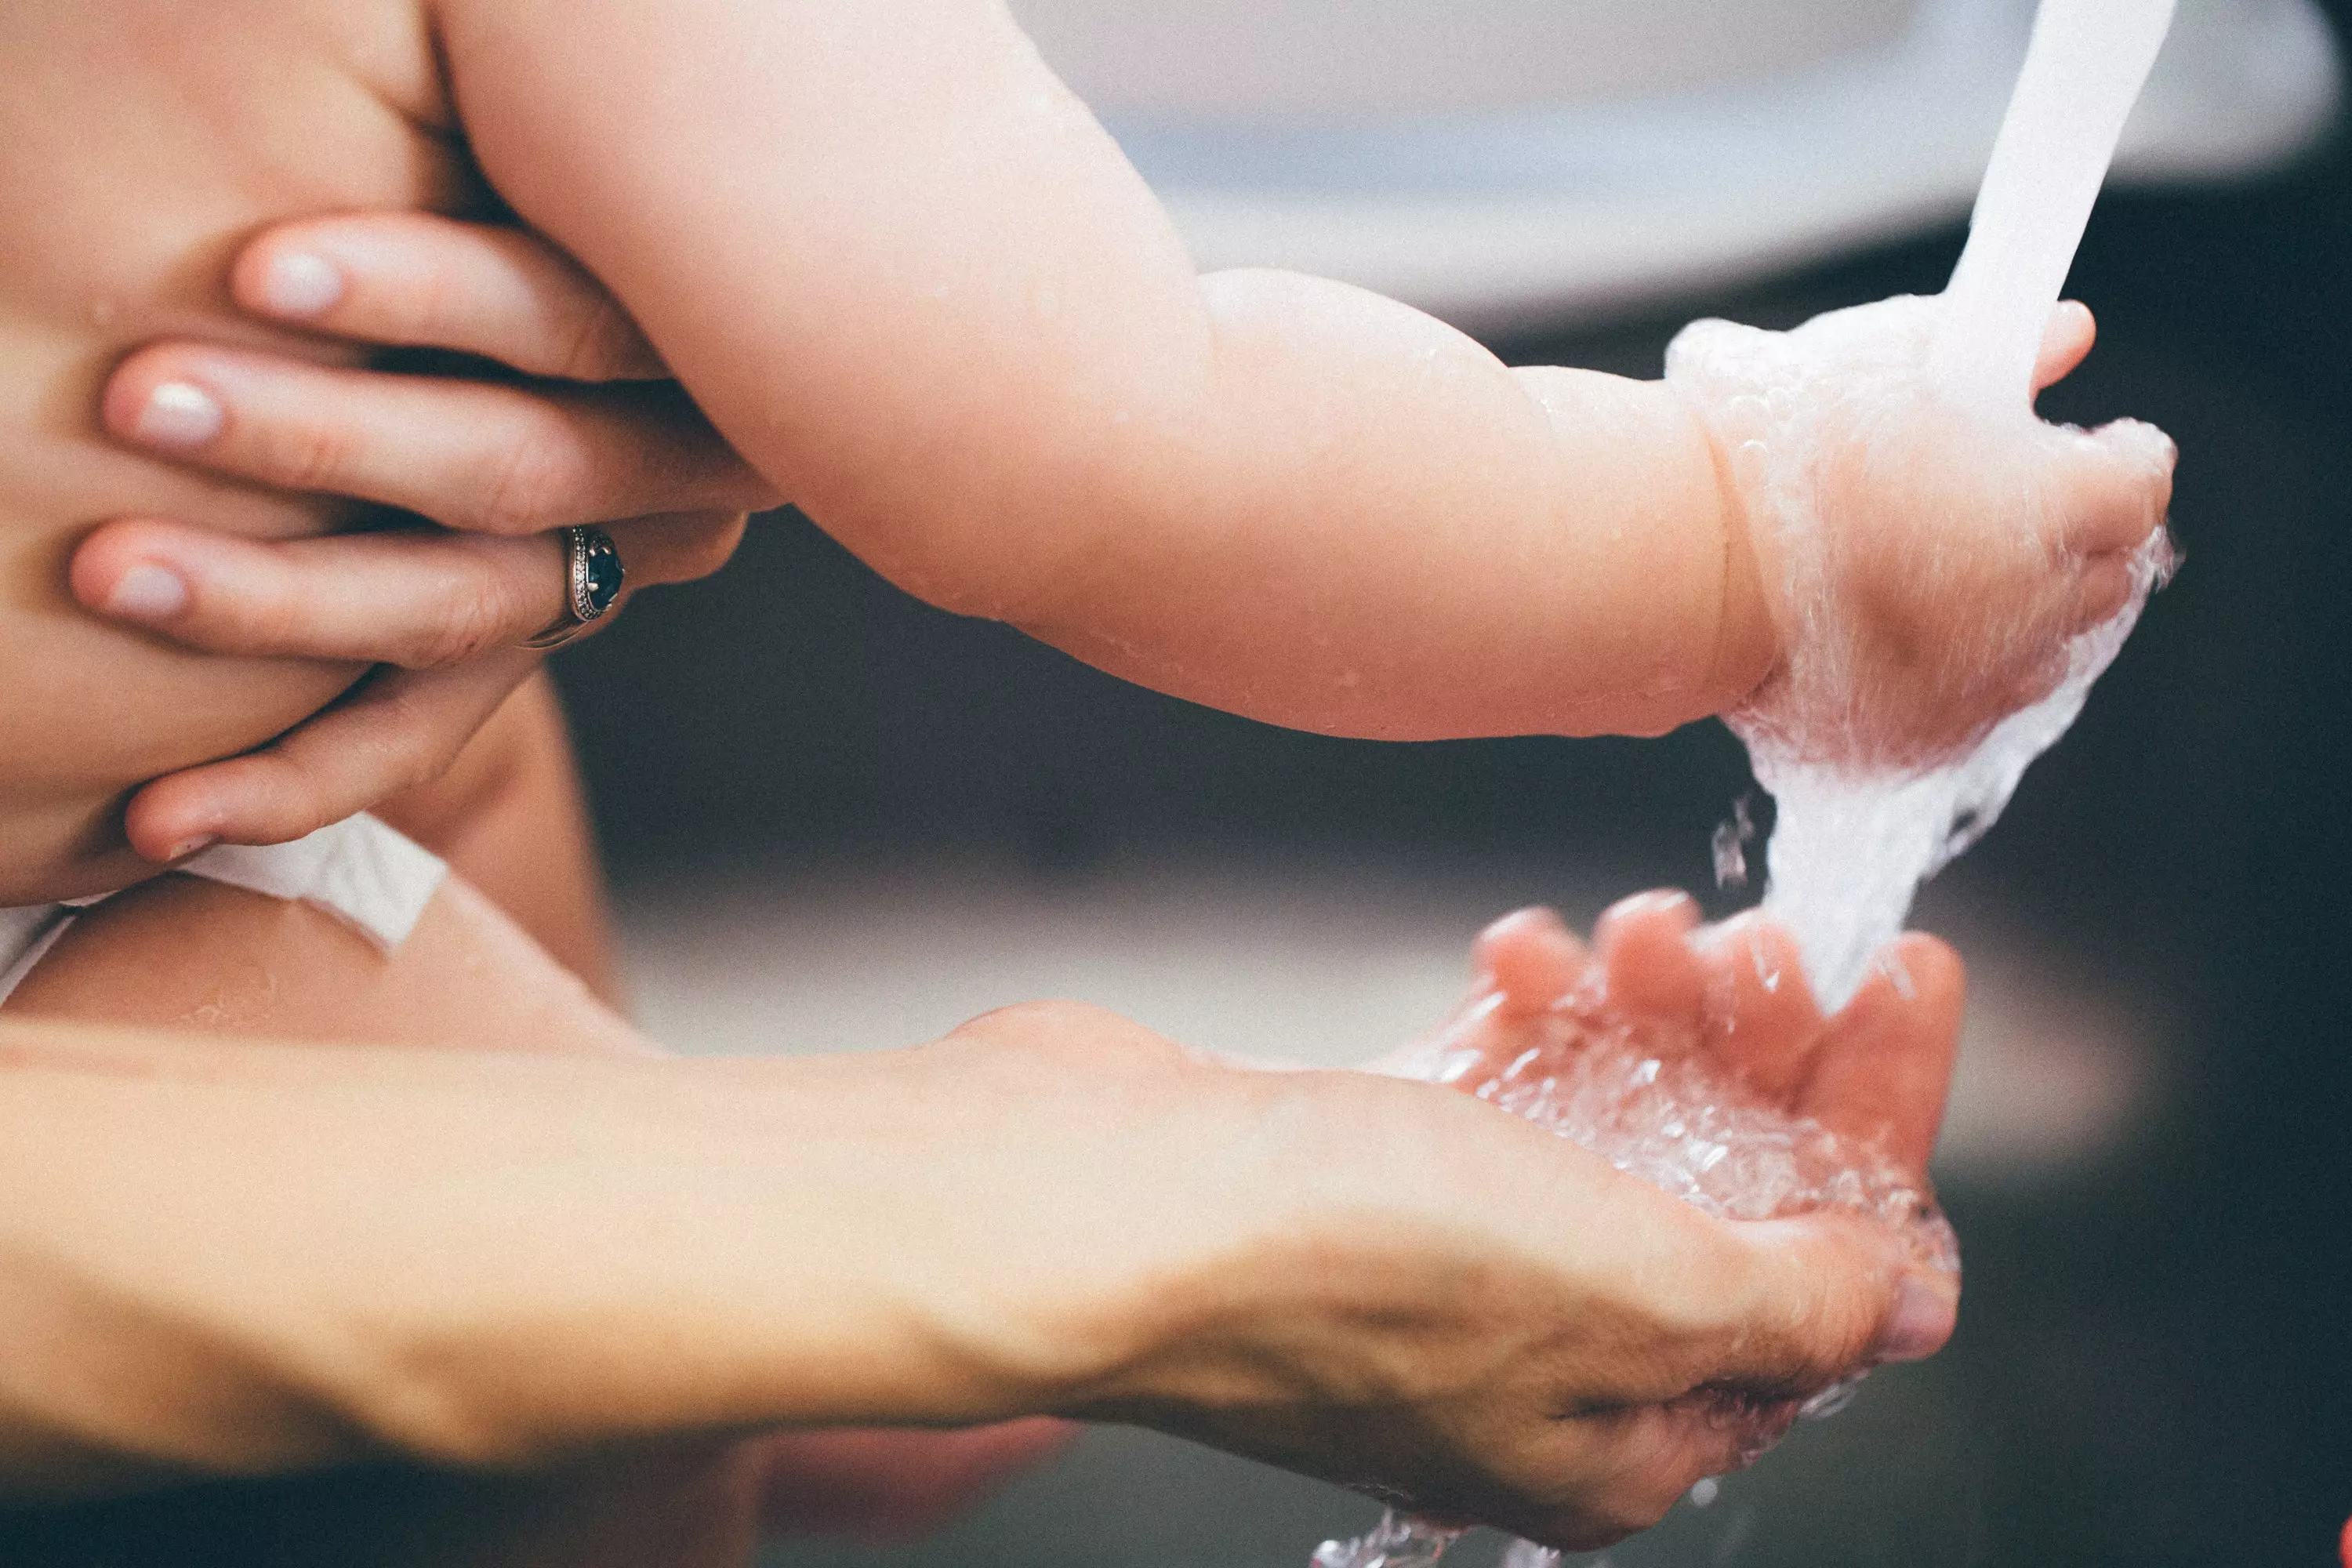 Washing a baby's hands is simple, but toddlers and primary school kids will need encouraging (